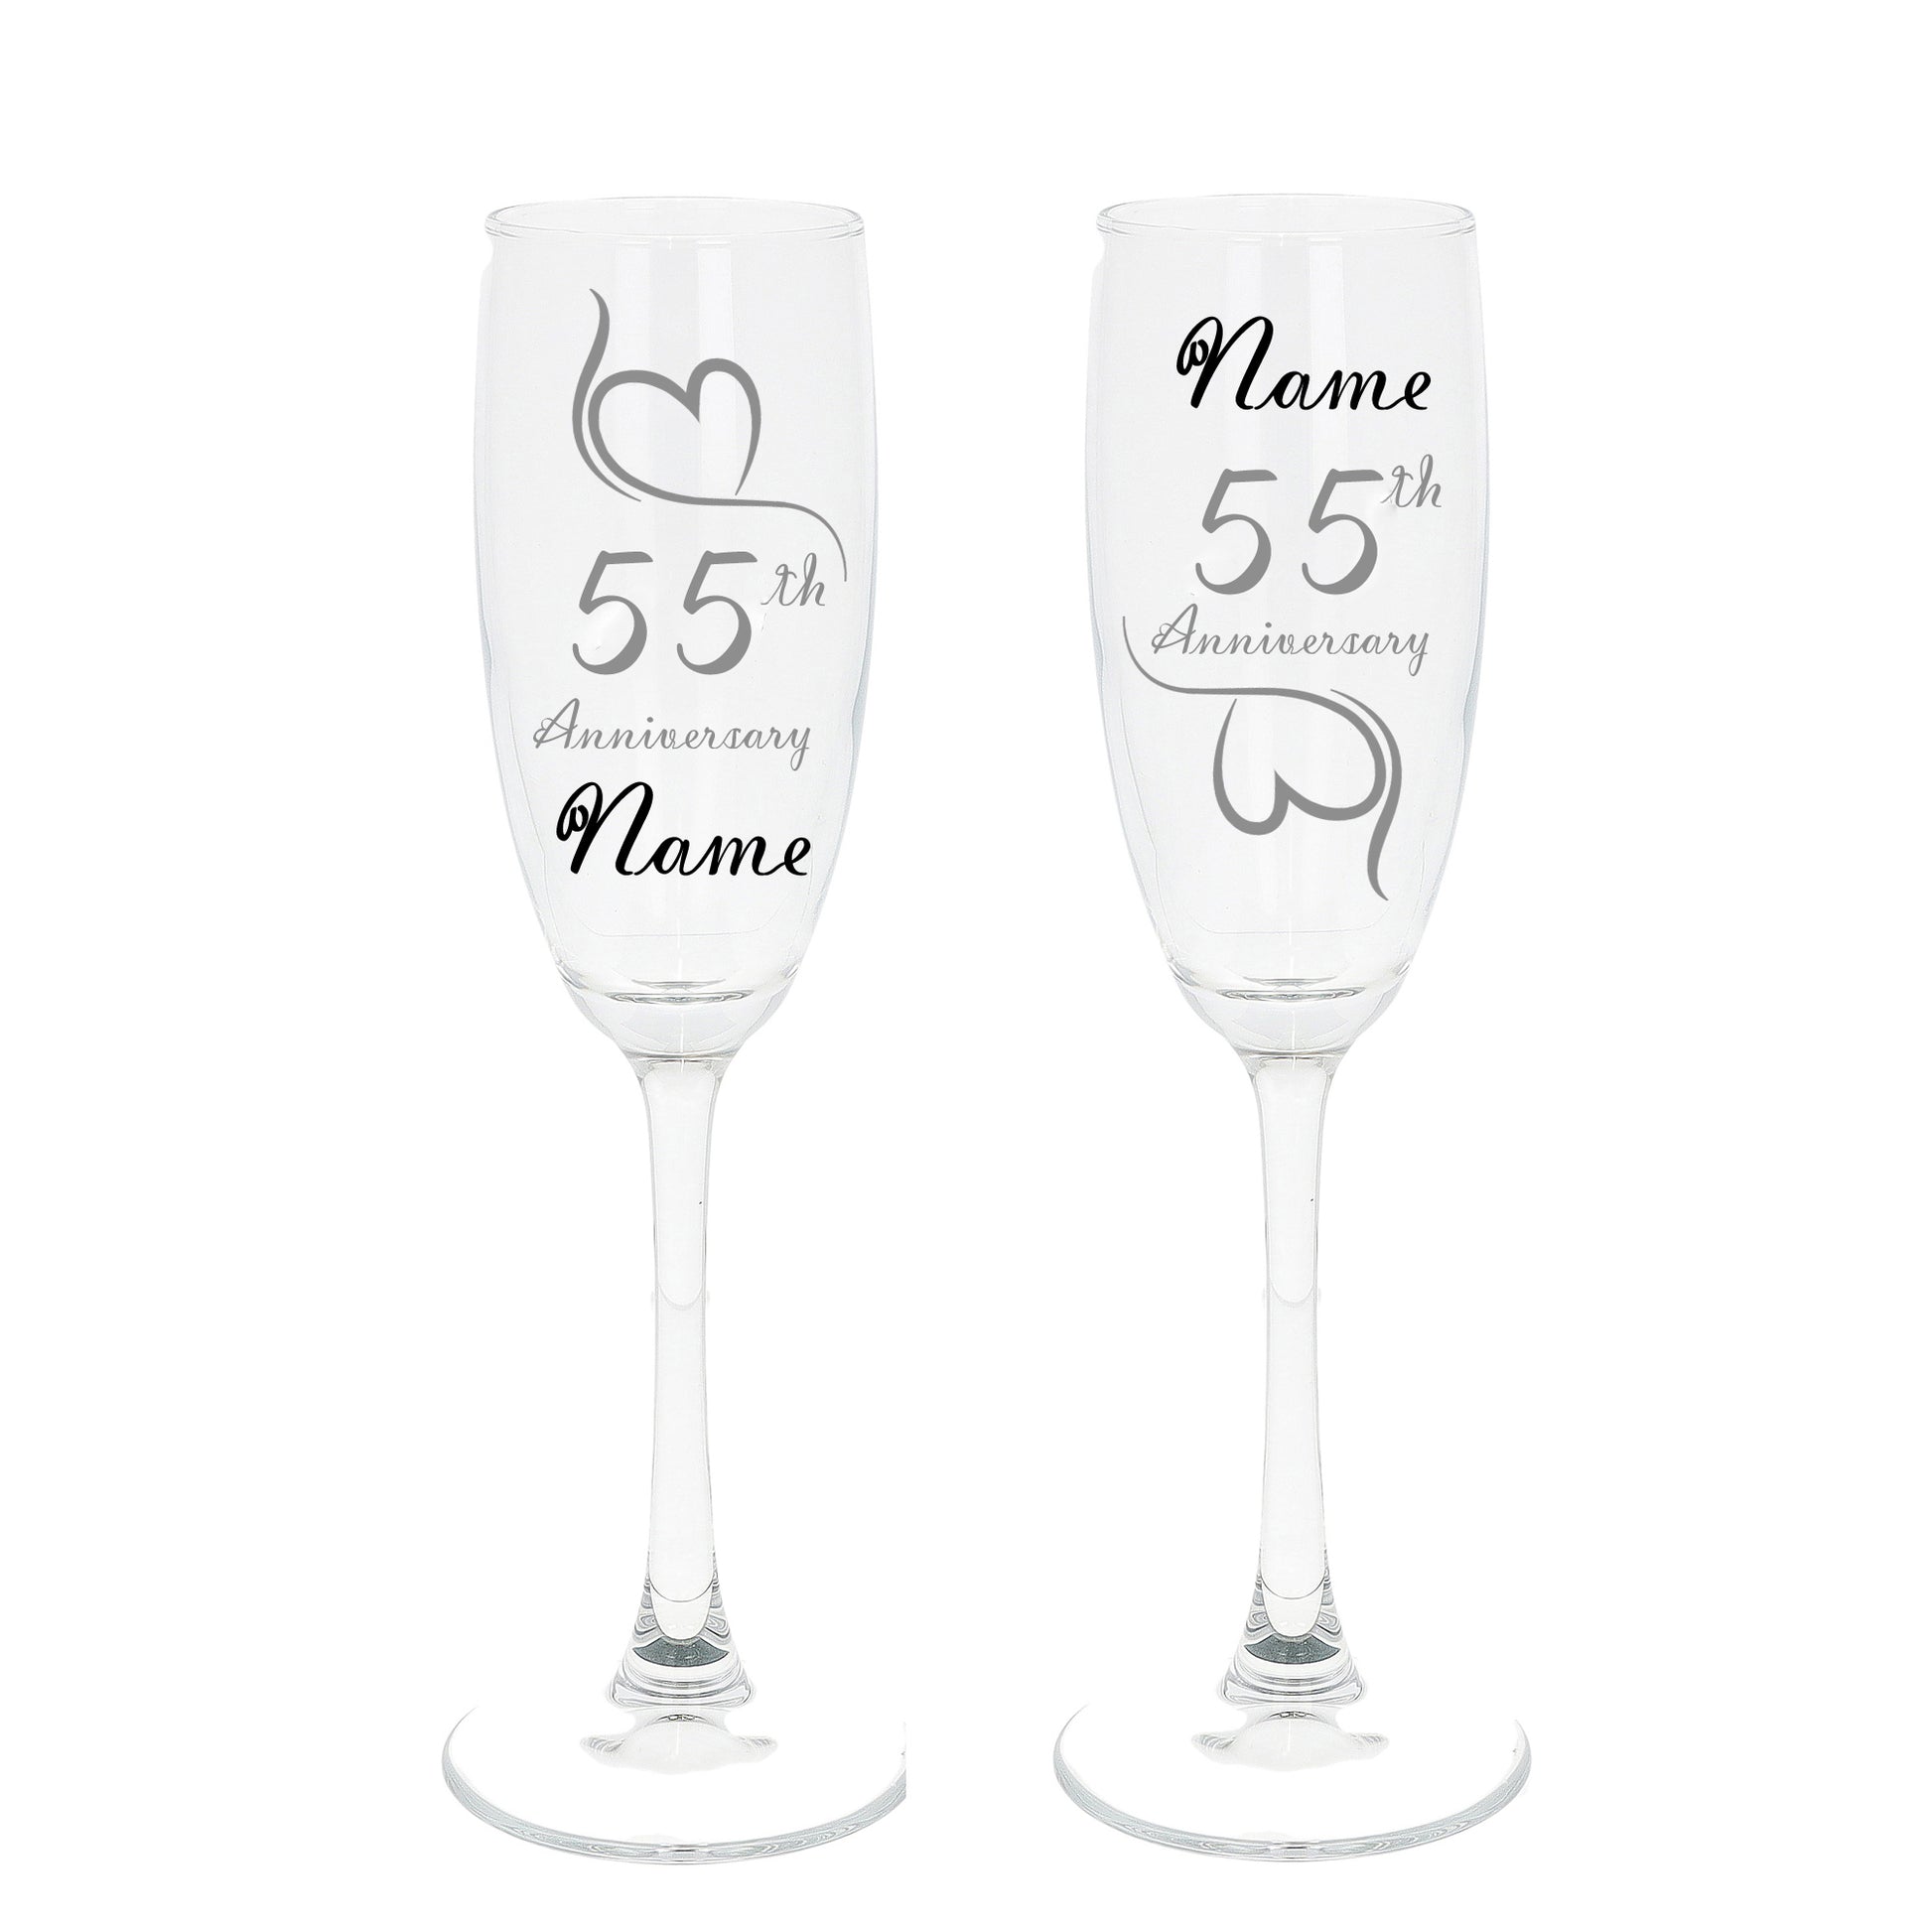 Engraved 55th Emerald Wedding Anniversary Personalised Engraved Champagne Glass Gift Set  - Always Looking Good -   